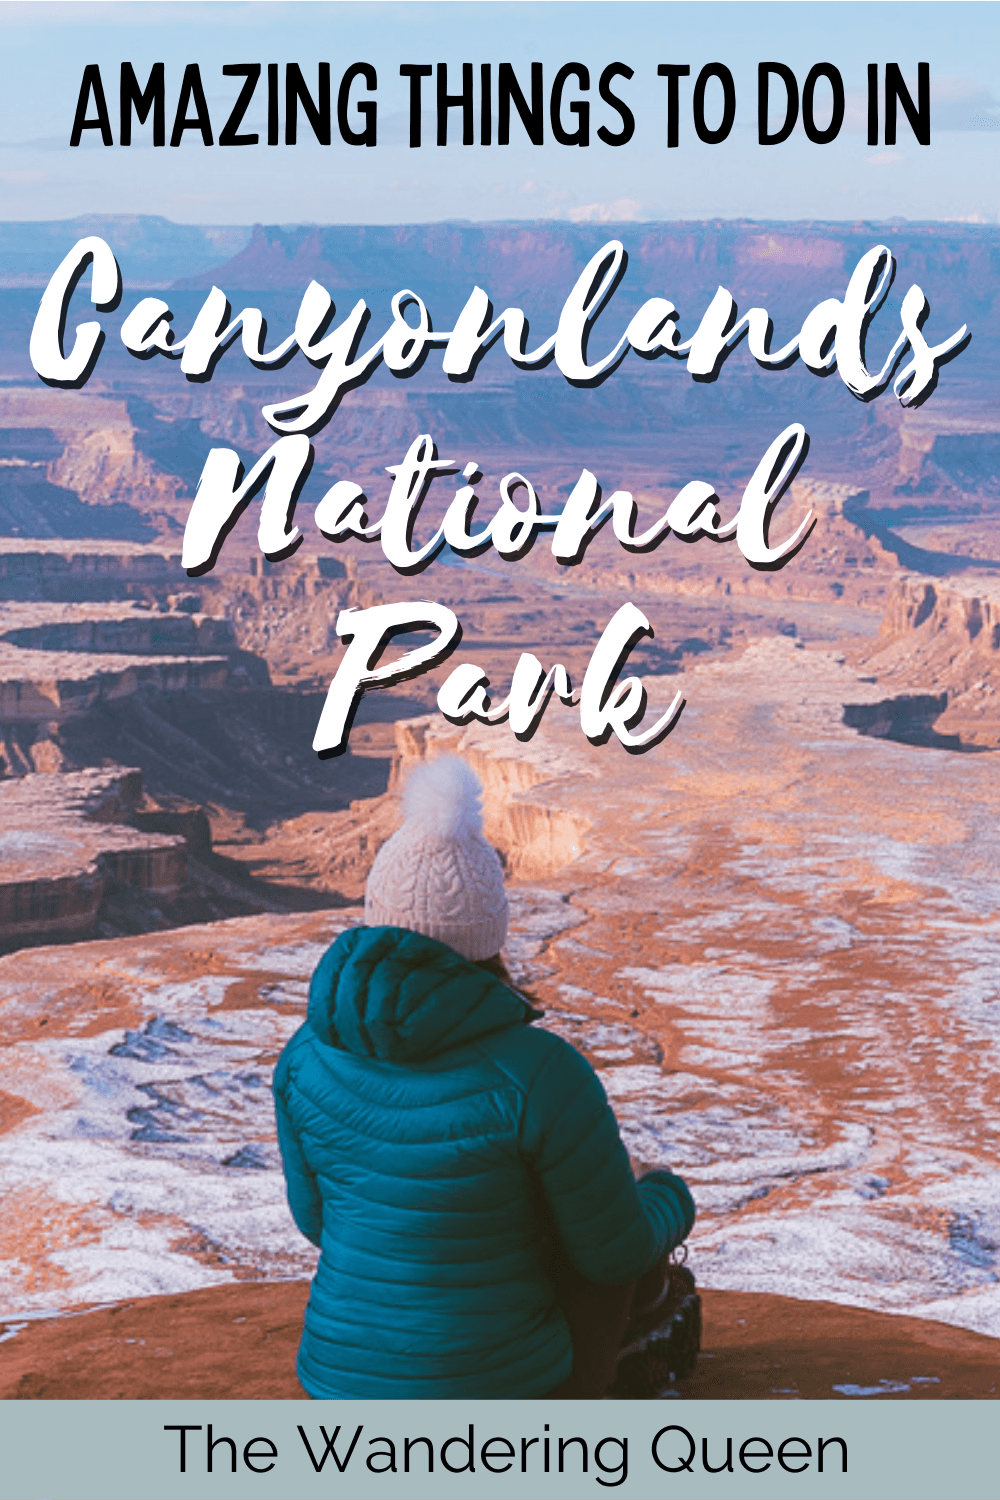 The Best Hikes In Canyonlands National Park pin